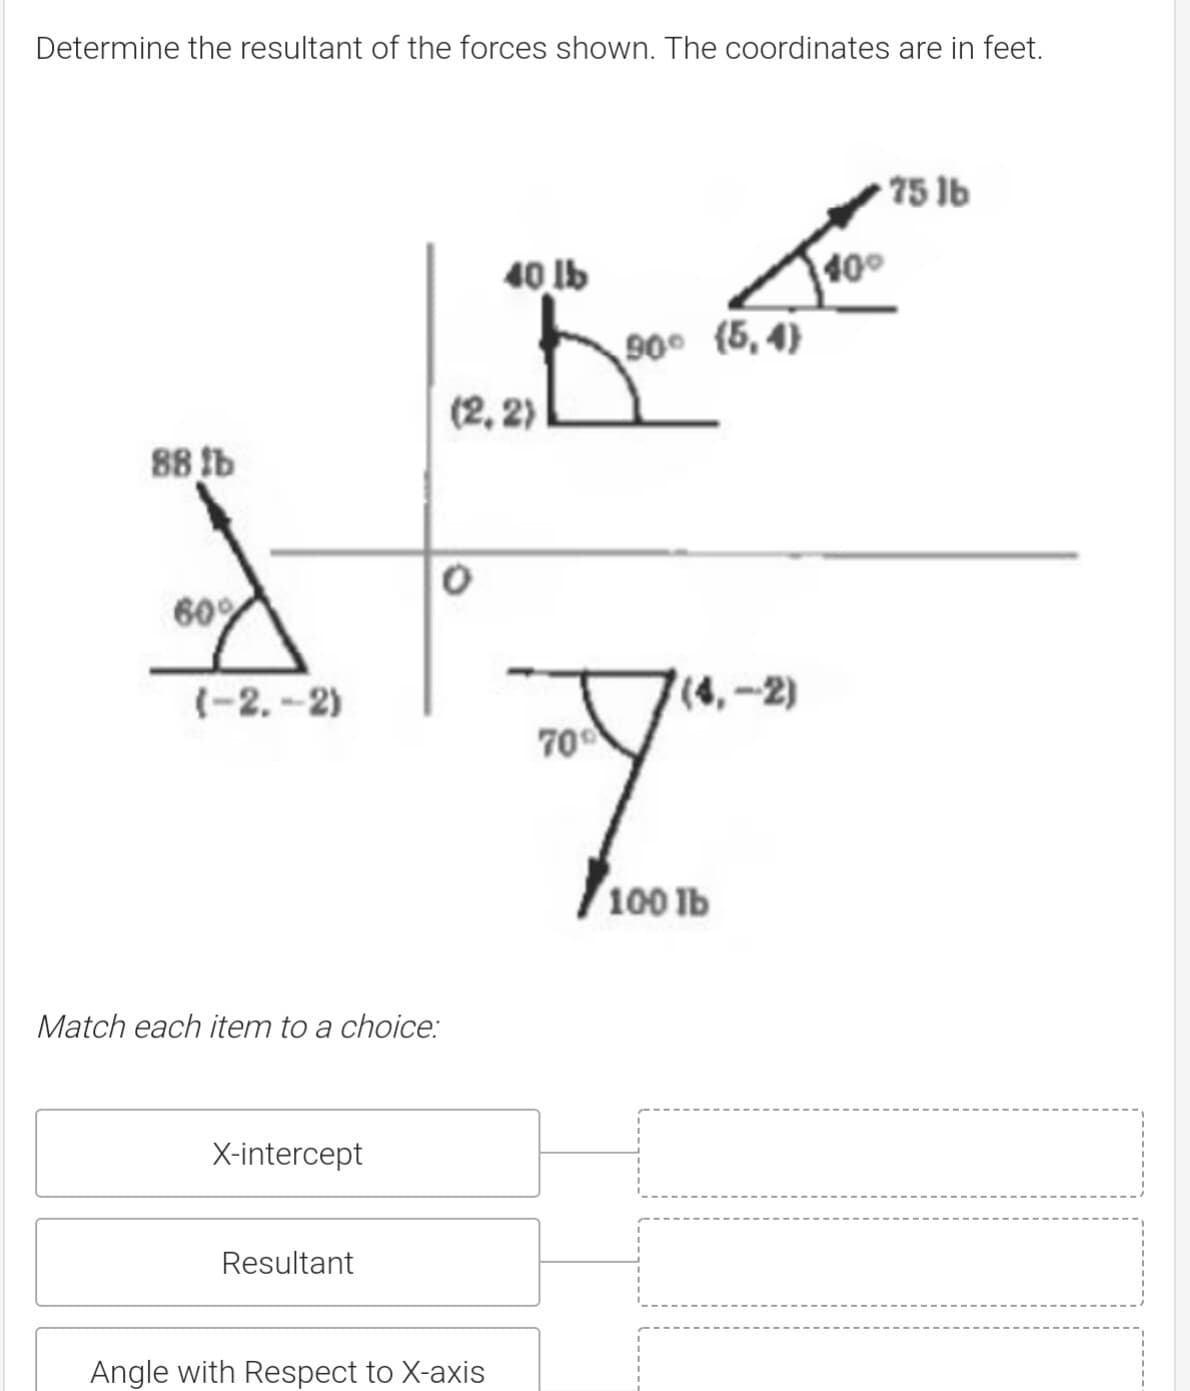 Determine the resultant of the forces shown. The coordinates are in feet.
75 lb
40 lb
400
90° (5, 4)
(2, 2)
88 b
60%
(-2. -2)
(4,-2)
70
100 lb
Match each item to a choice:
X-intercept
Resultant
Angle with Respect to X-axis
